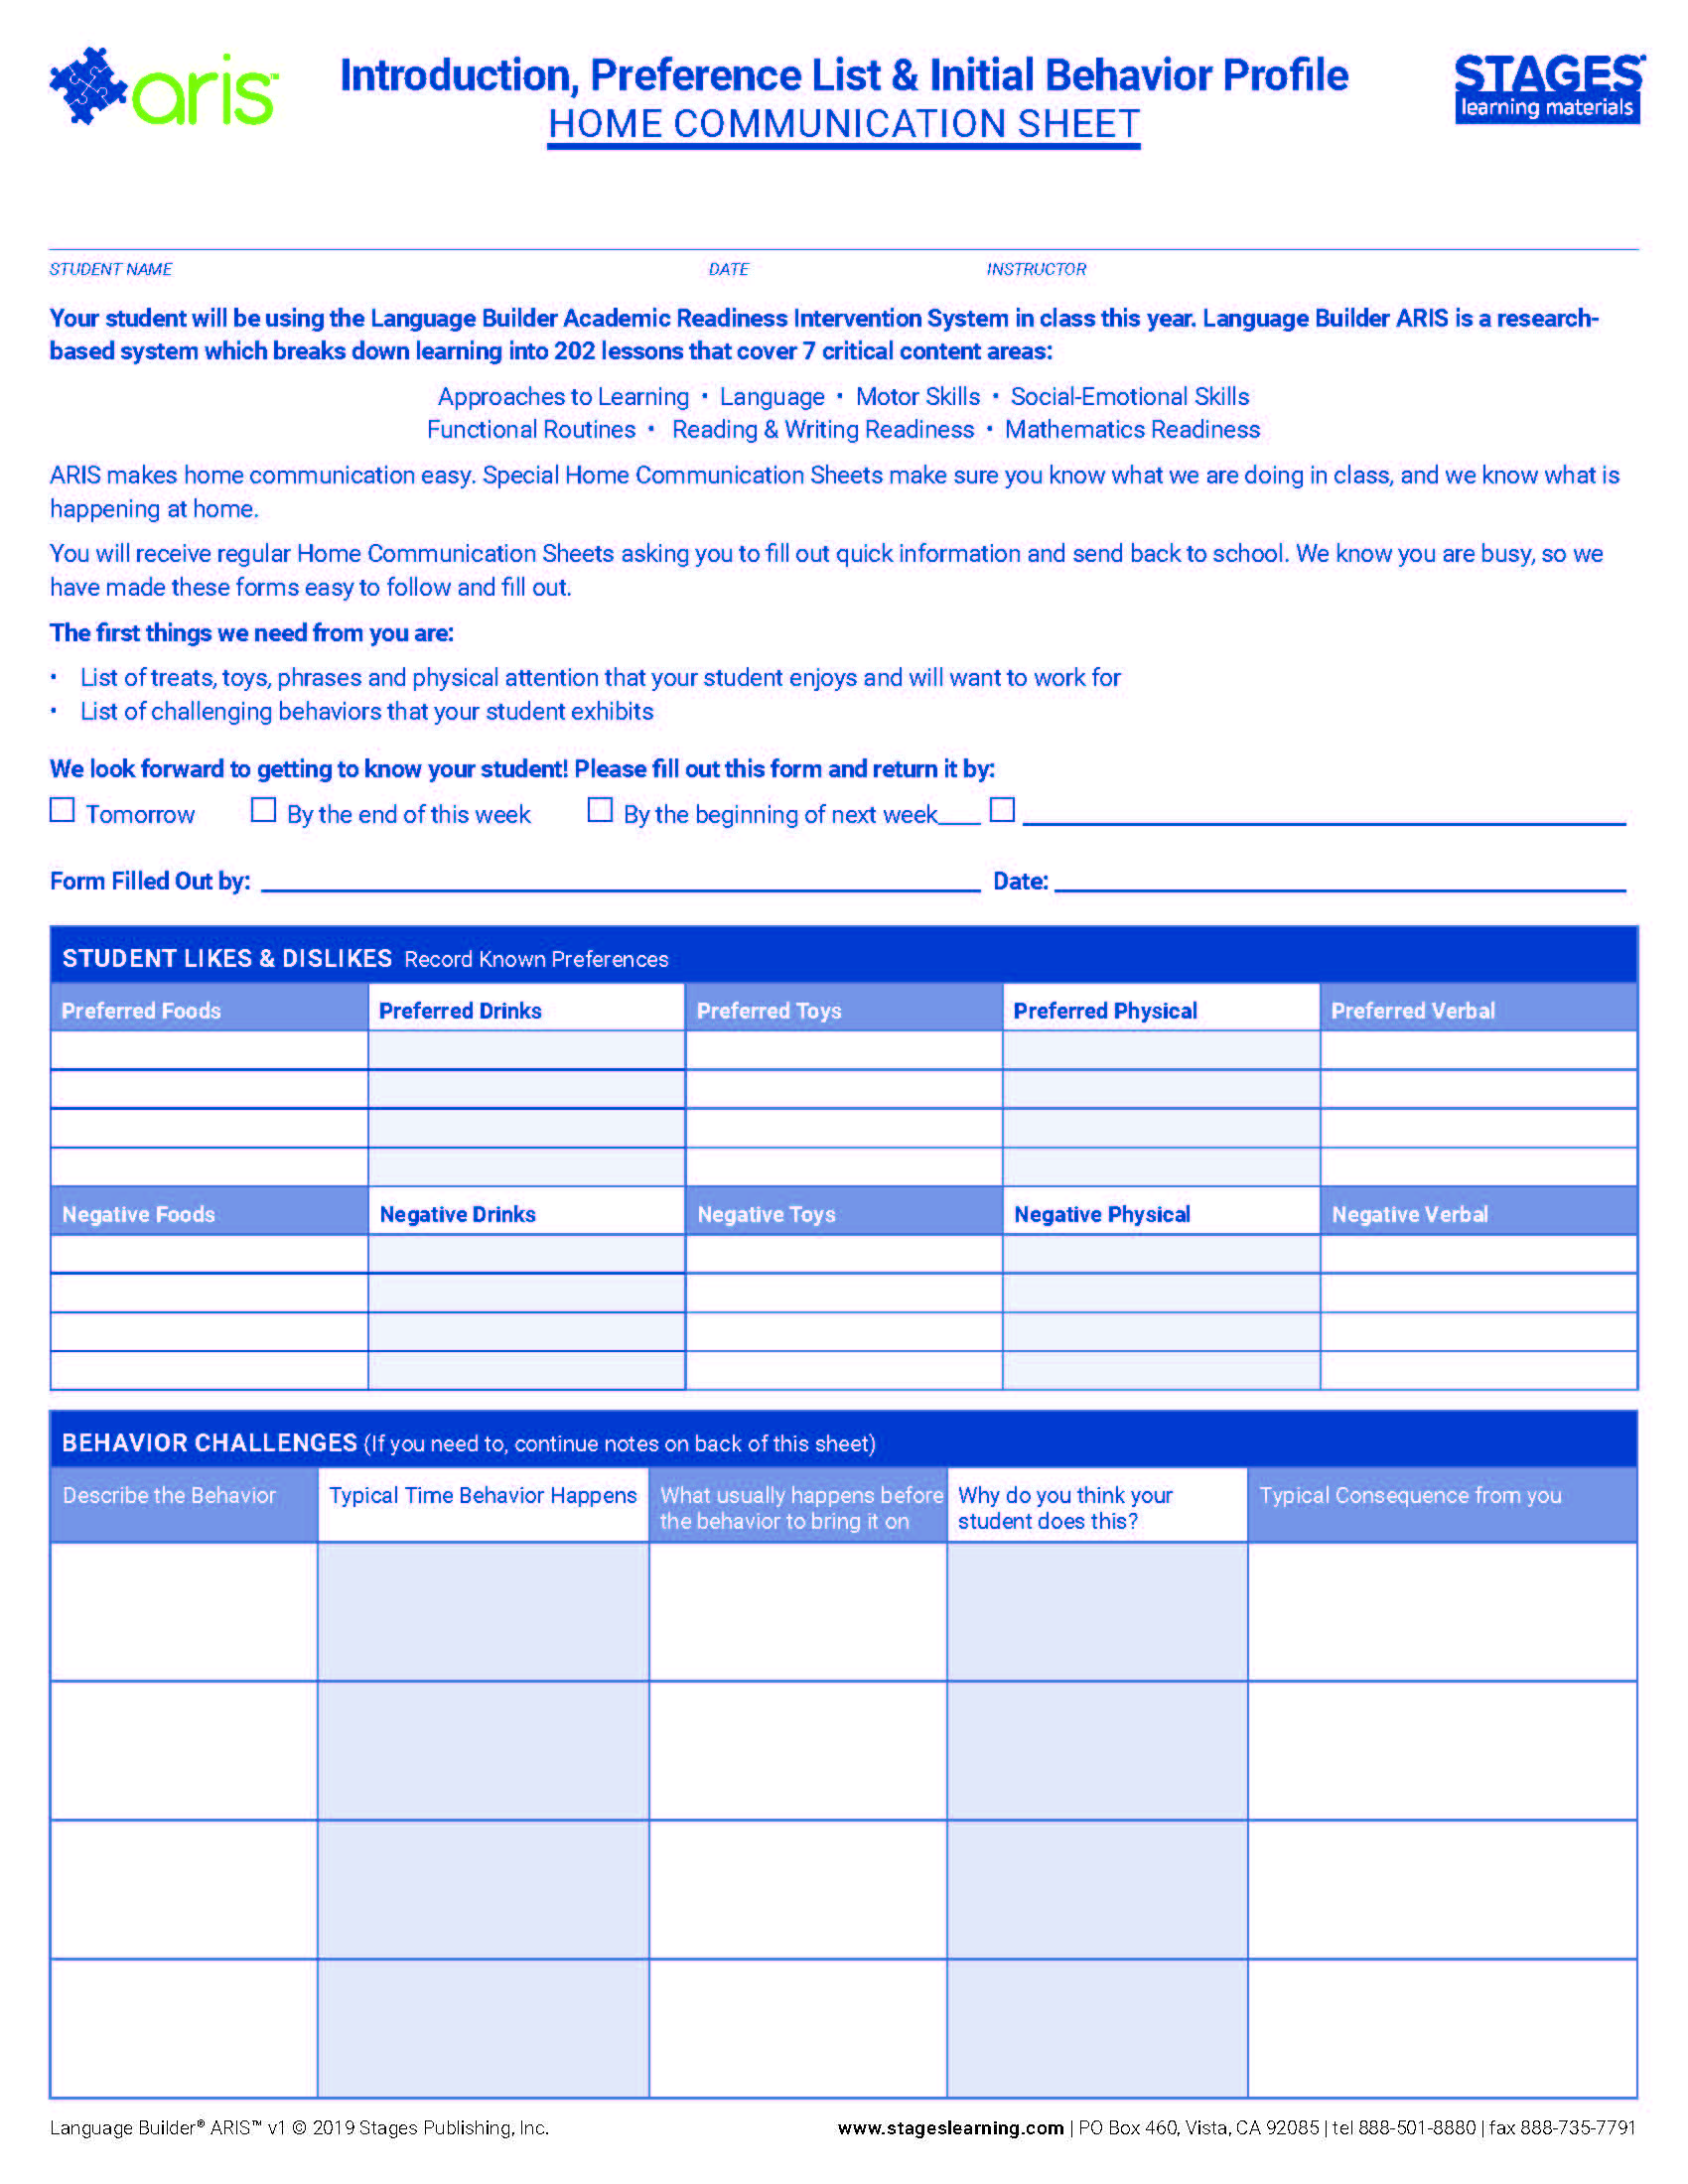 Picture of introduction Home Communication Sheet